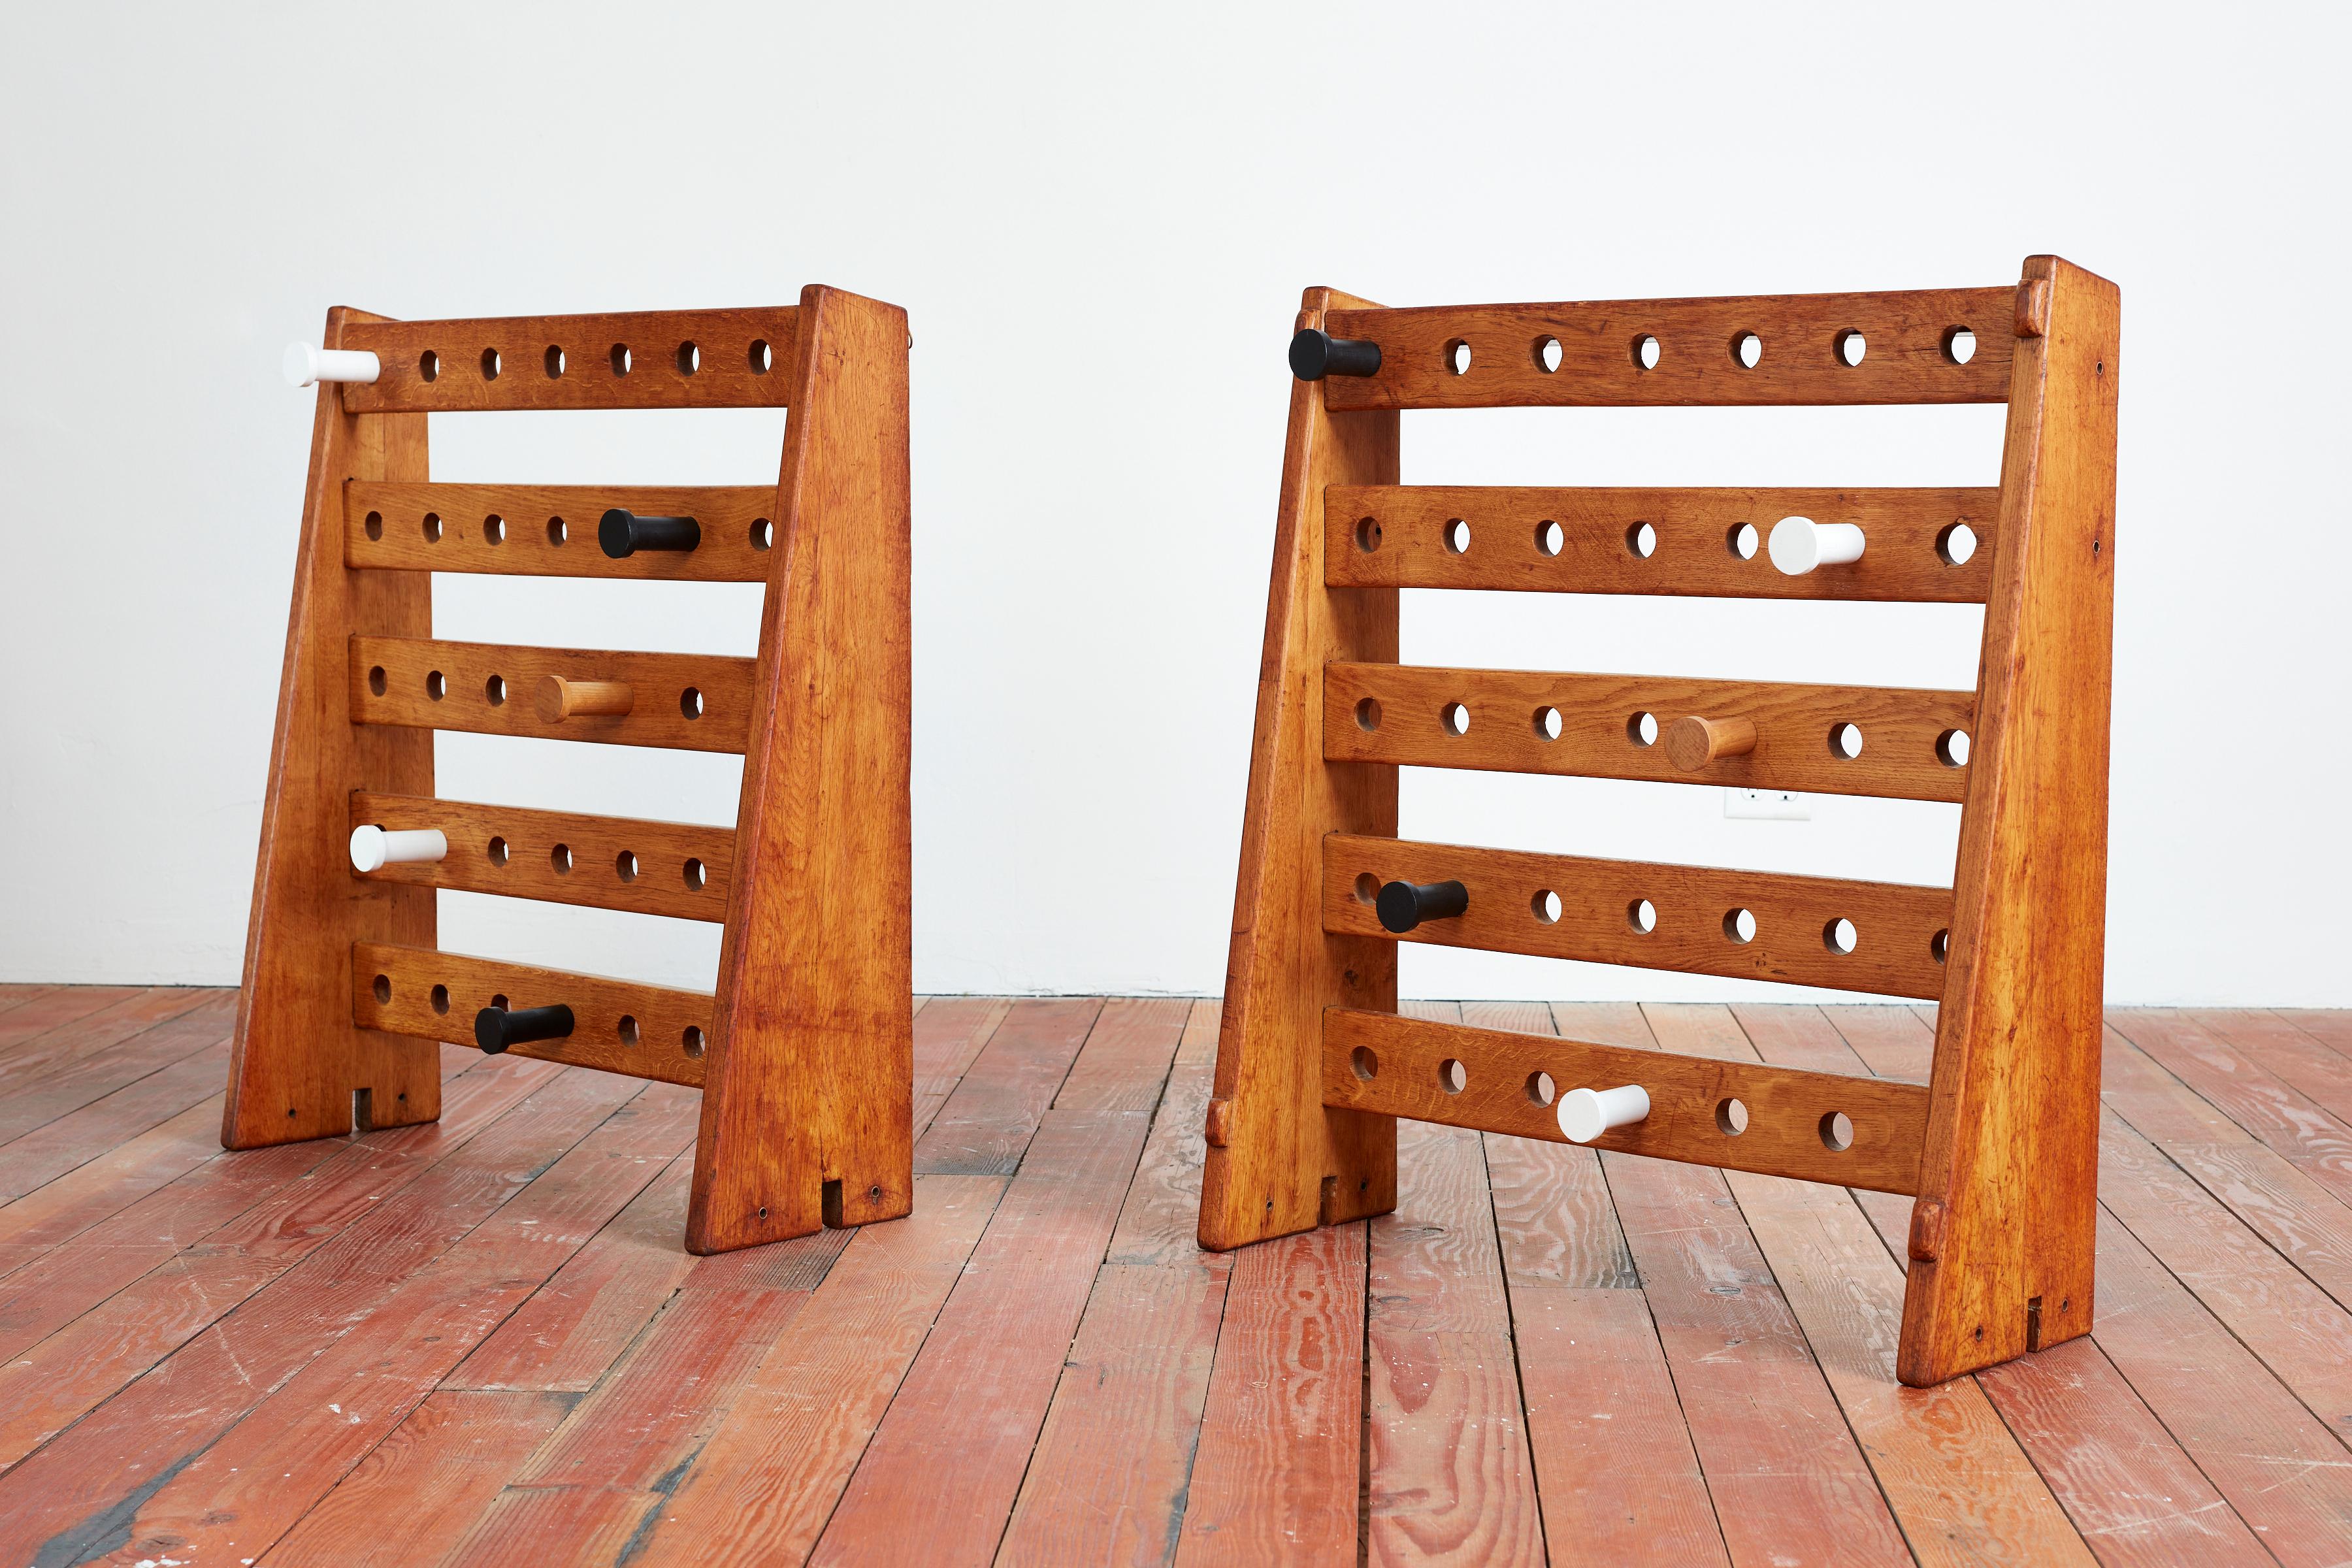 Unique French coat hangers with angular oak plank legs with wonderful patina and giant white / black circular hooks. 
Racks are free standing or can also be hung on a wall 
Most likely from a ski lodge or French School 
Playful design and